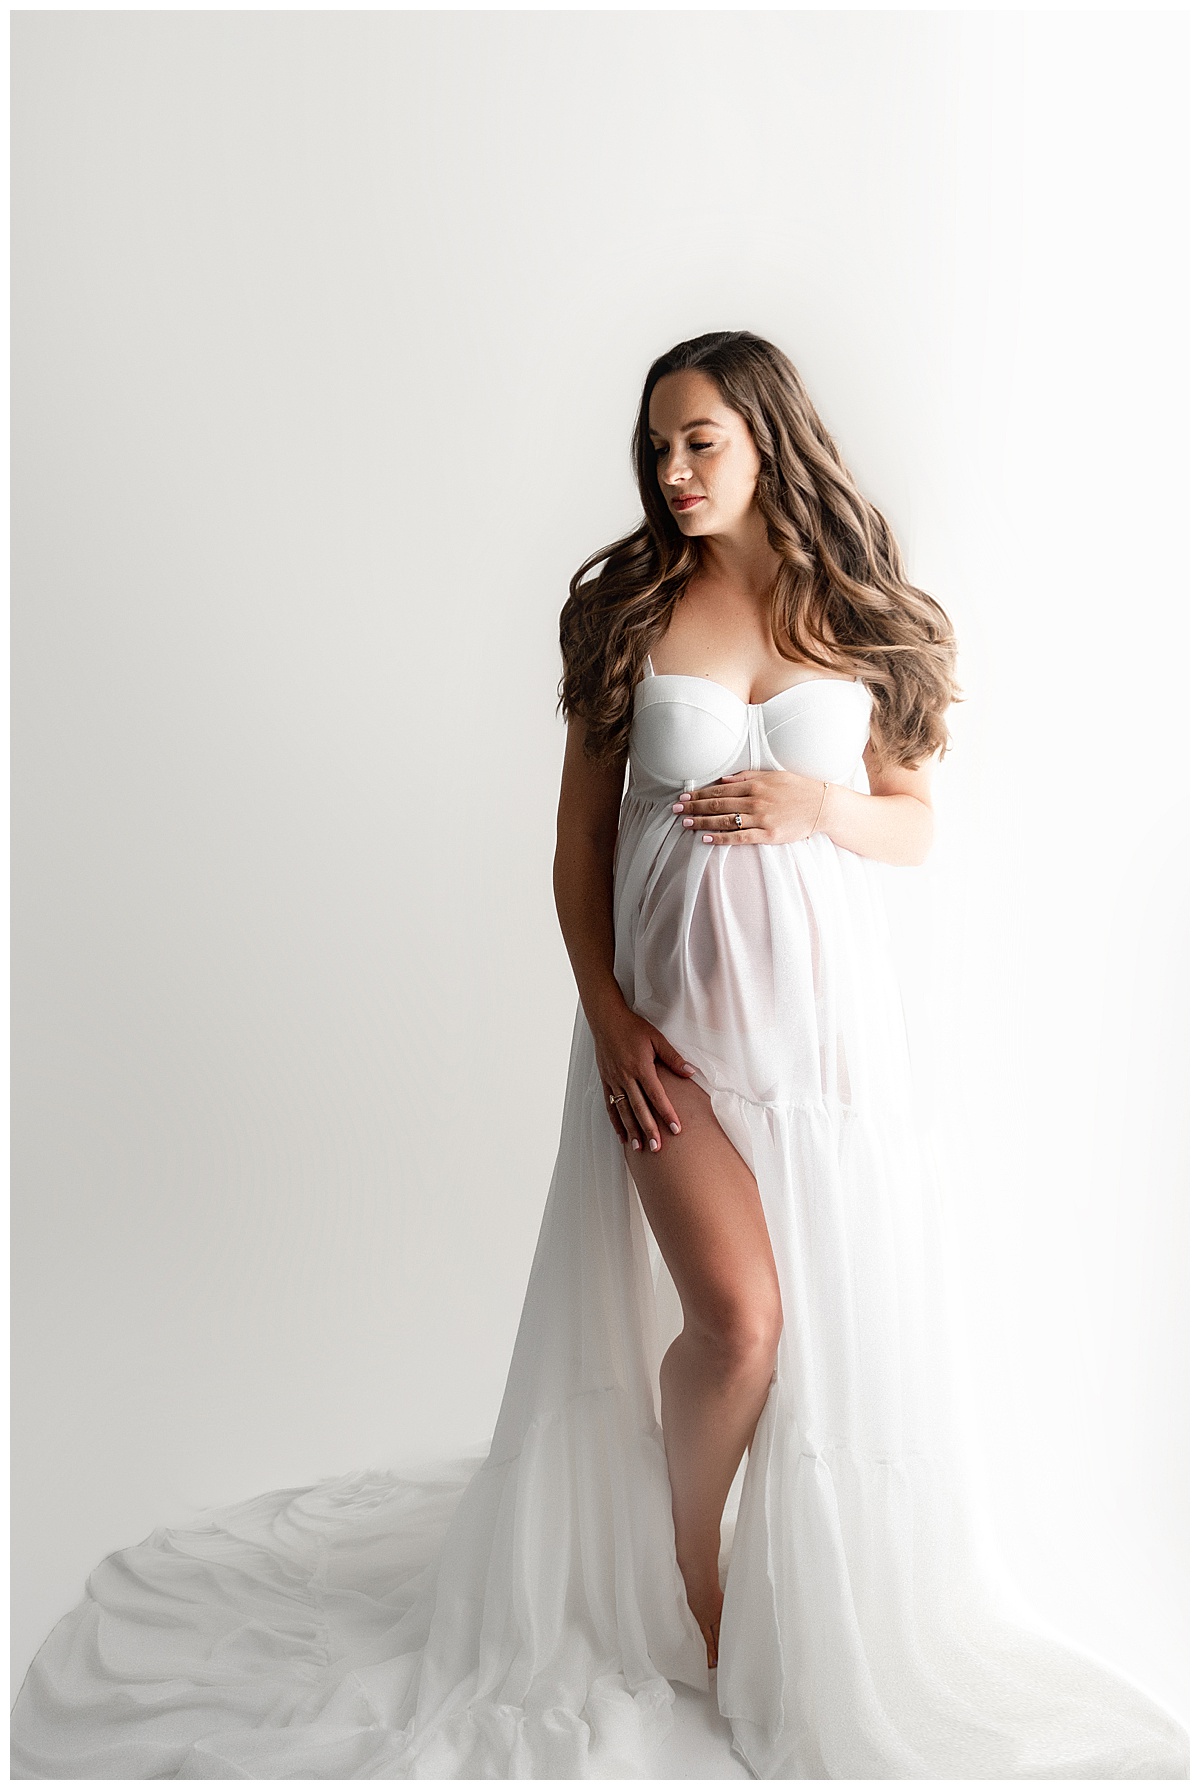 Mom has stunning Hair & Makeup for maternity session wearing a beautiful white gown